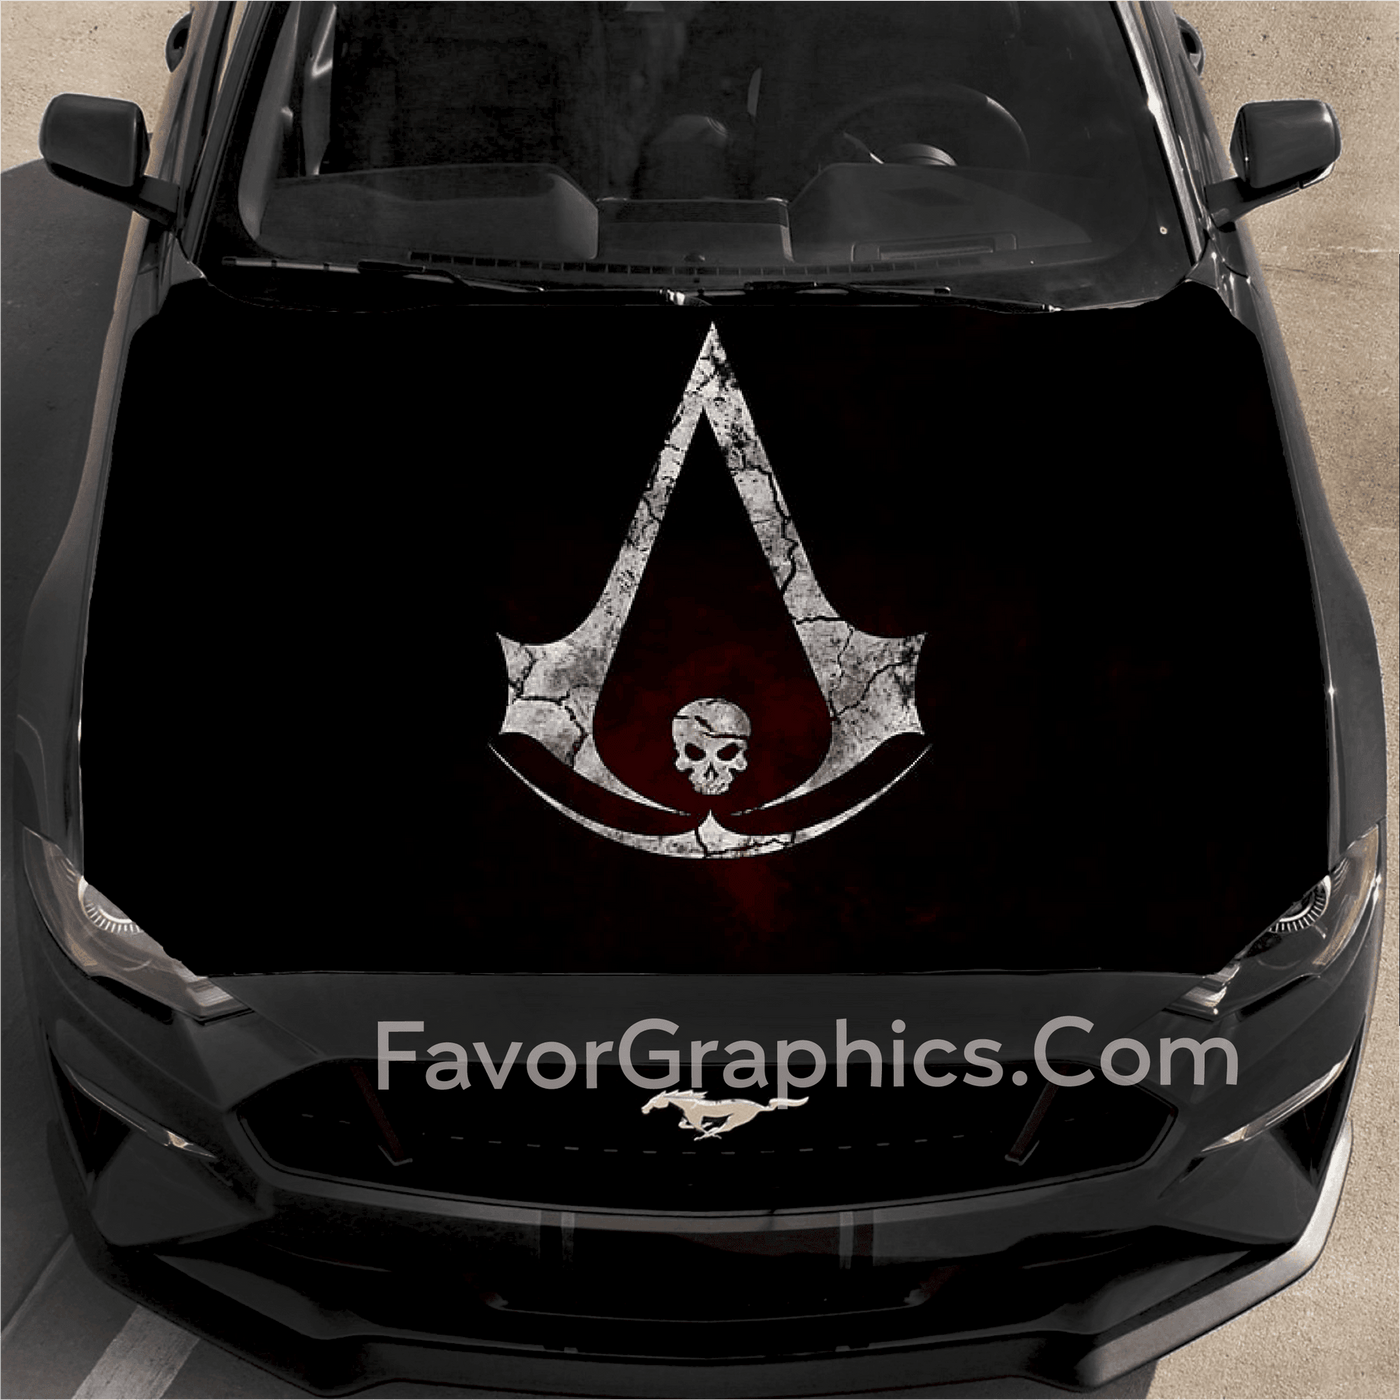 Ezio Auditore Assassin's Creed Car Decal Vinyl Hood Wrap High Quality Graphic